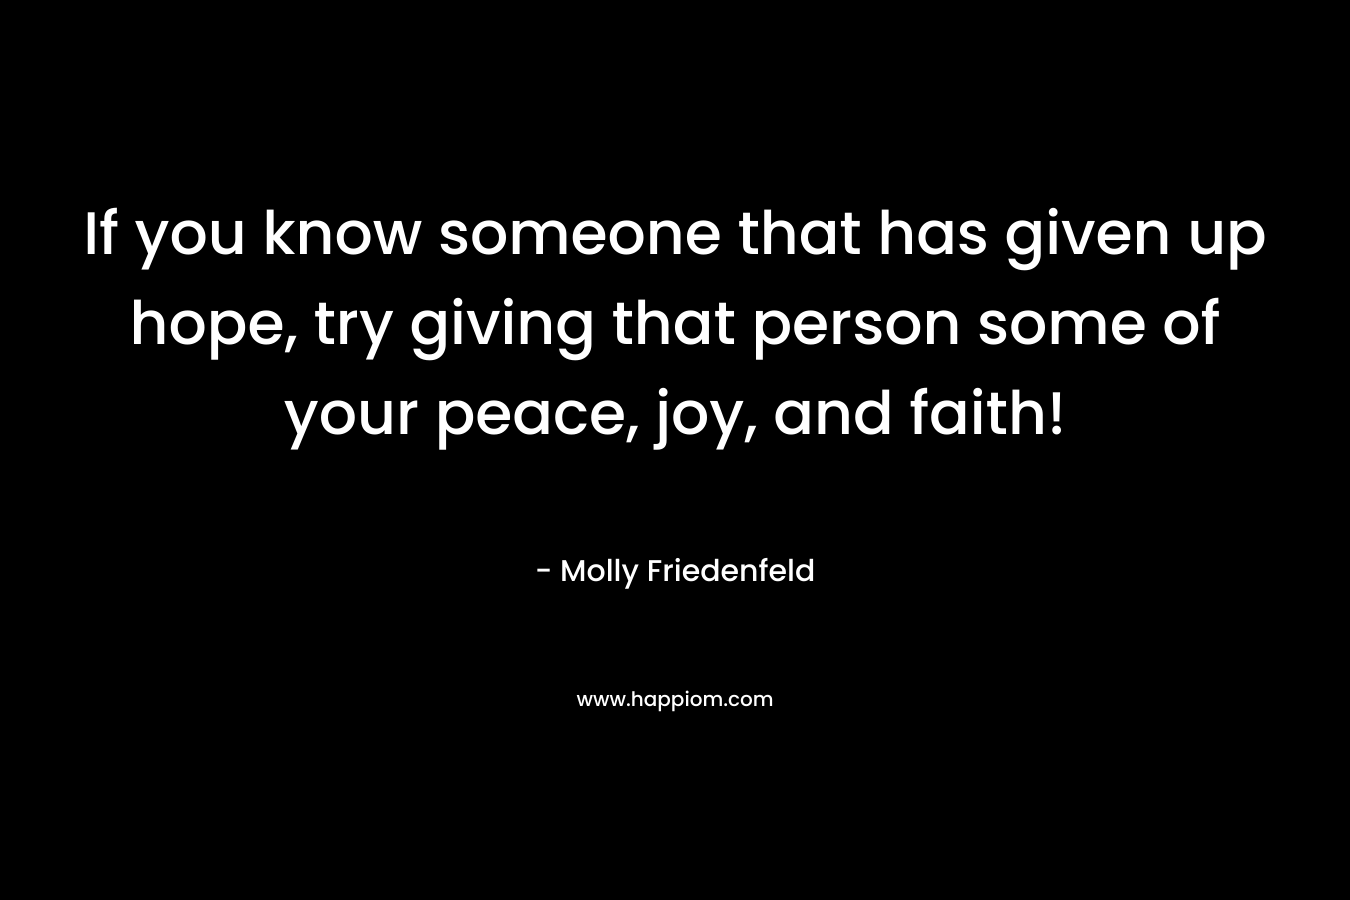 If you know someone that has given up hope, try giving that person some of your peace, joy, and faith!